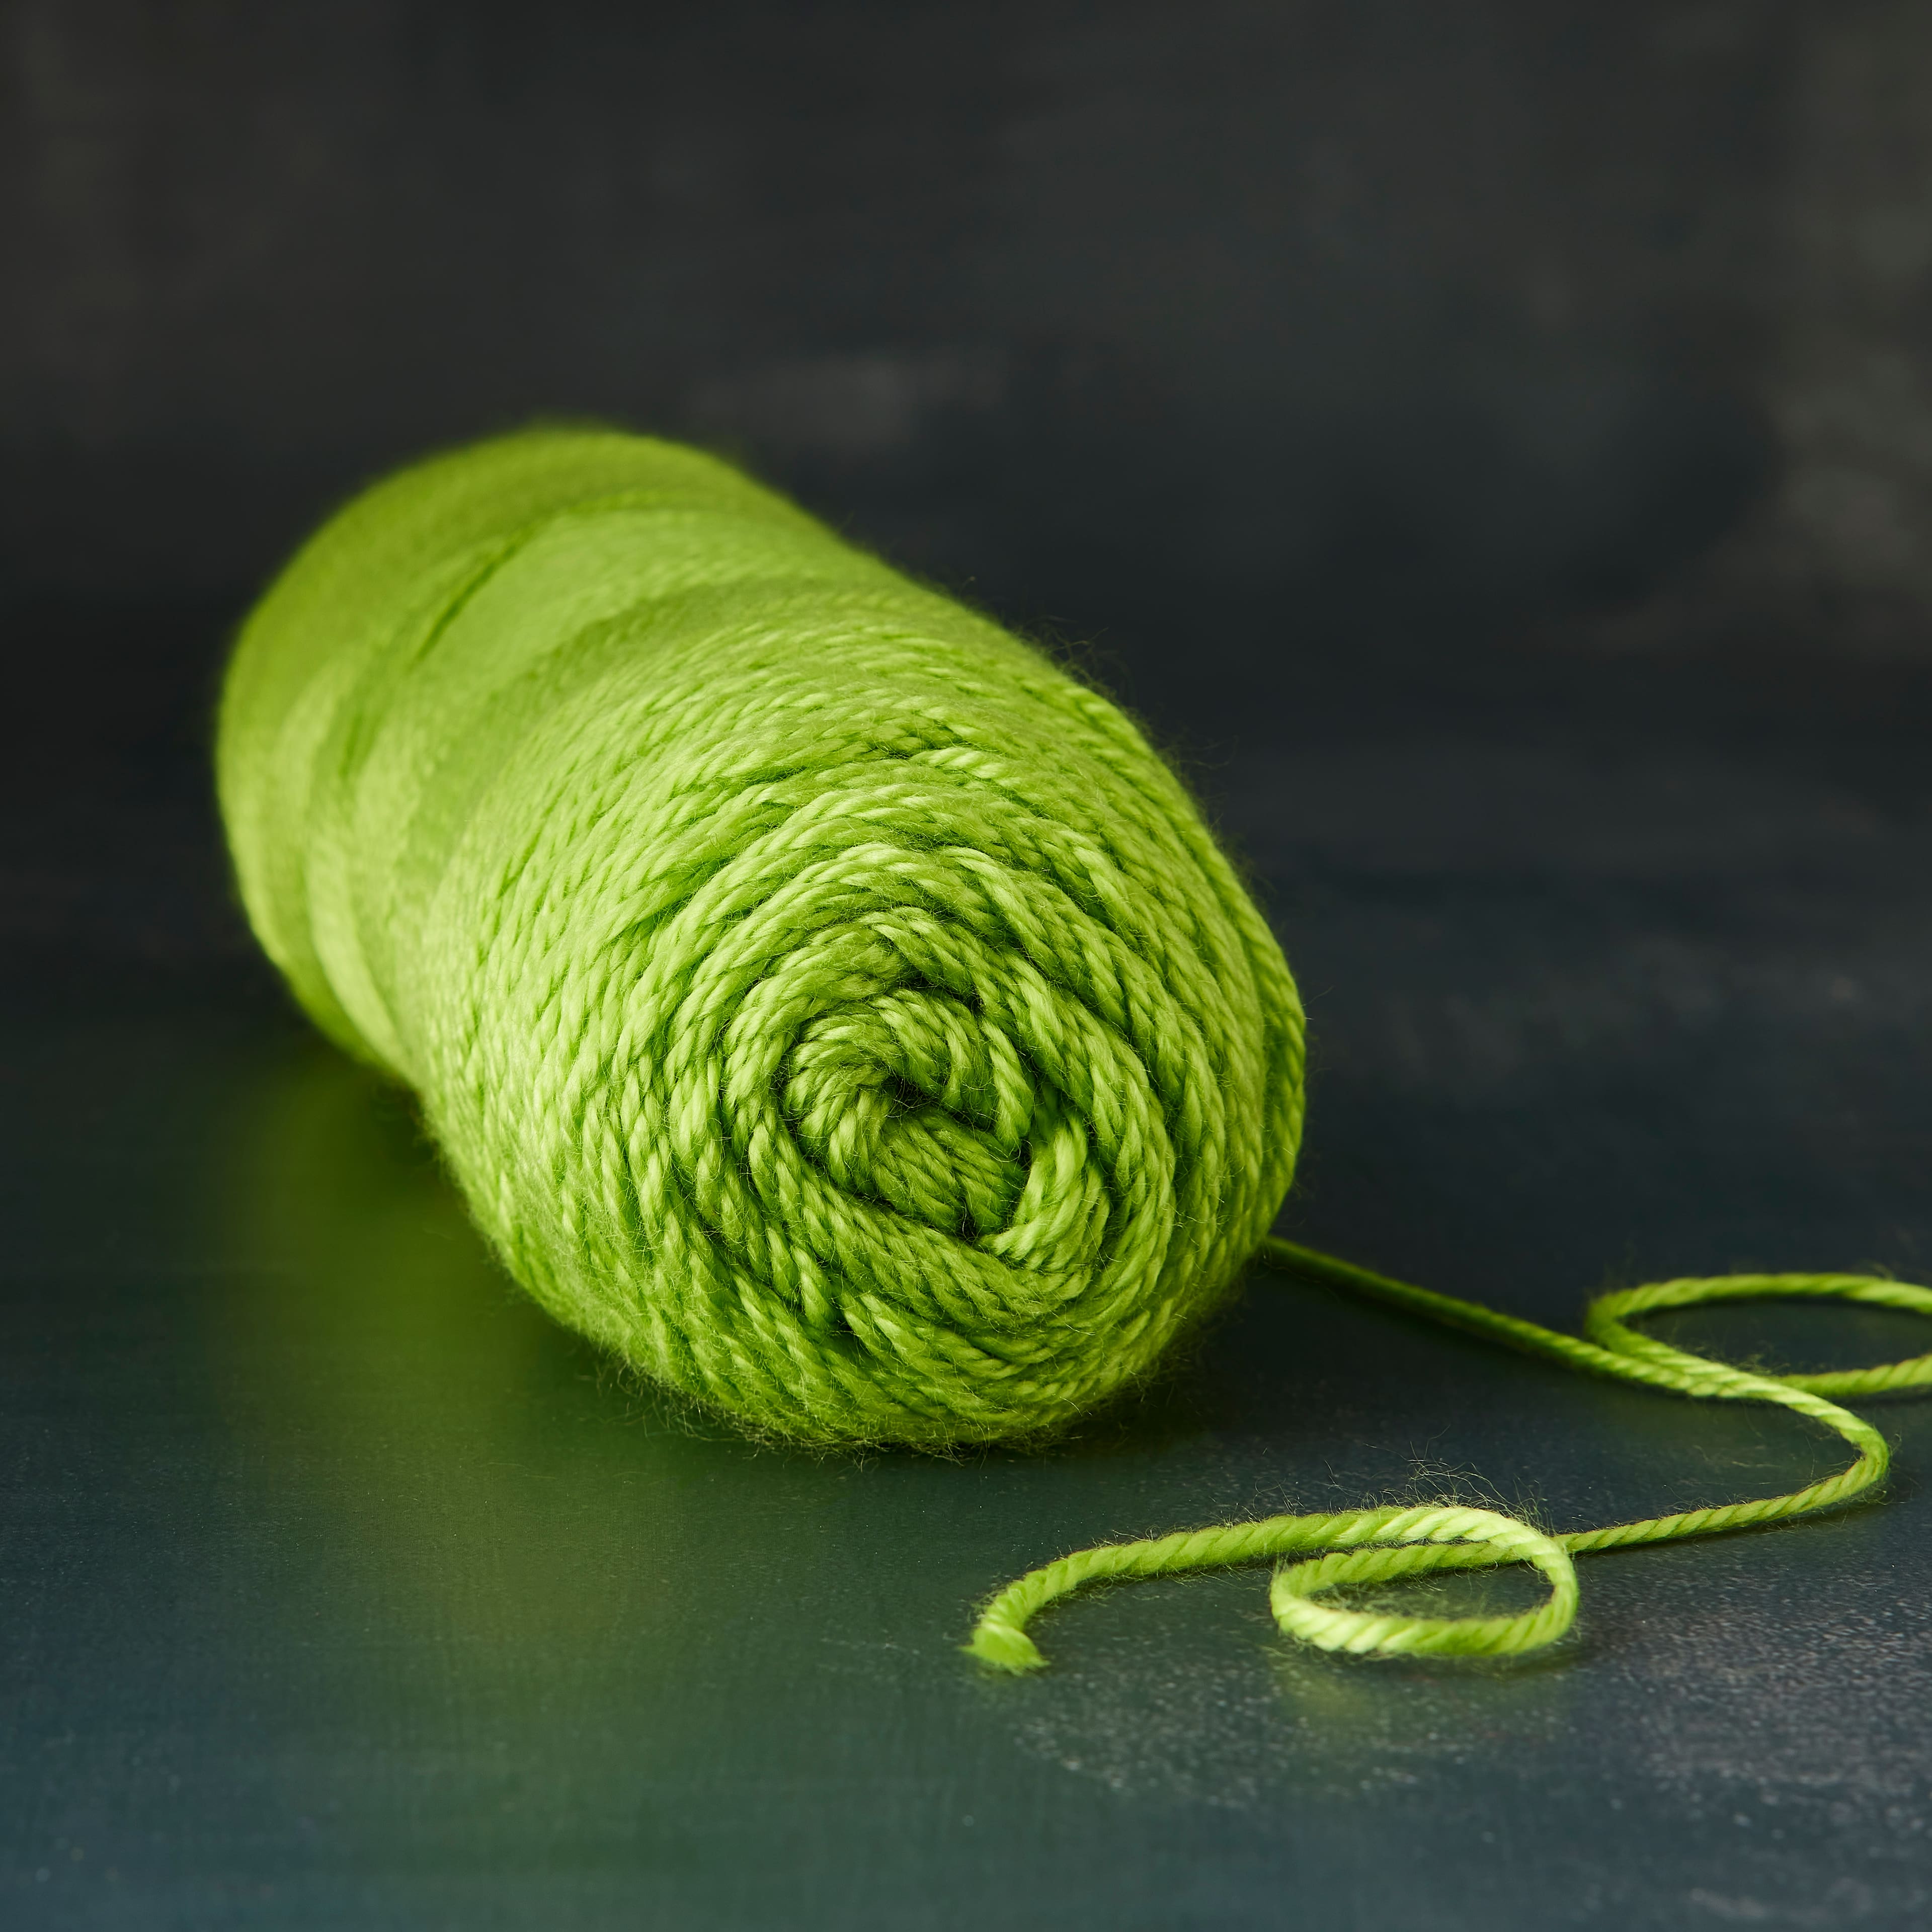 Soft & Shiny Solid Yarn by Loops & Threads®